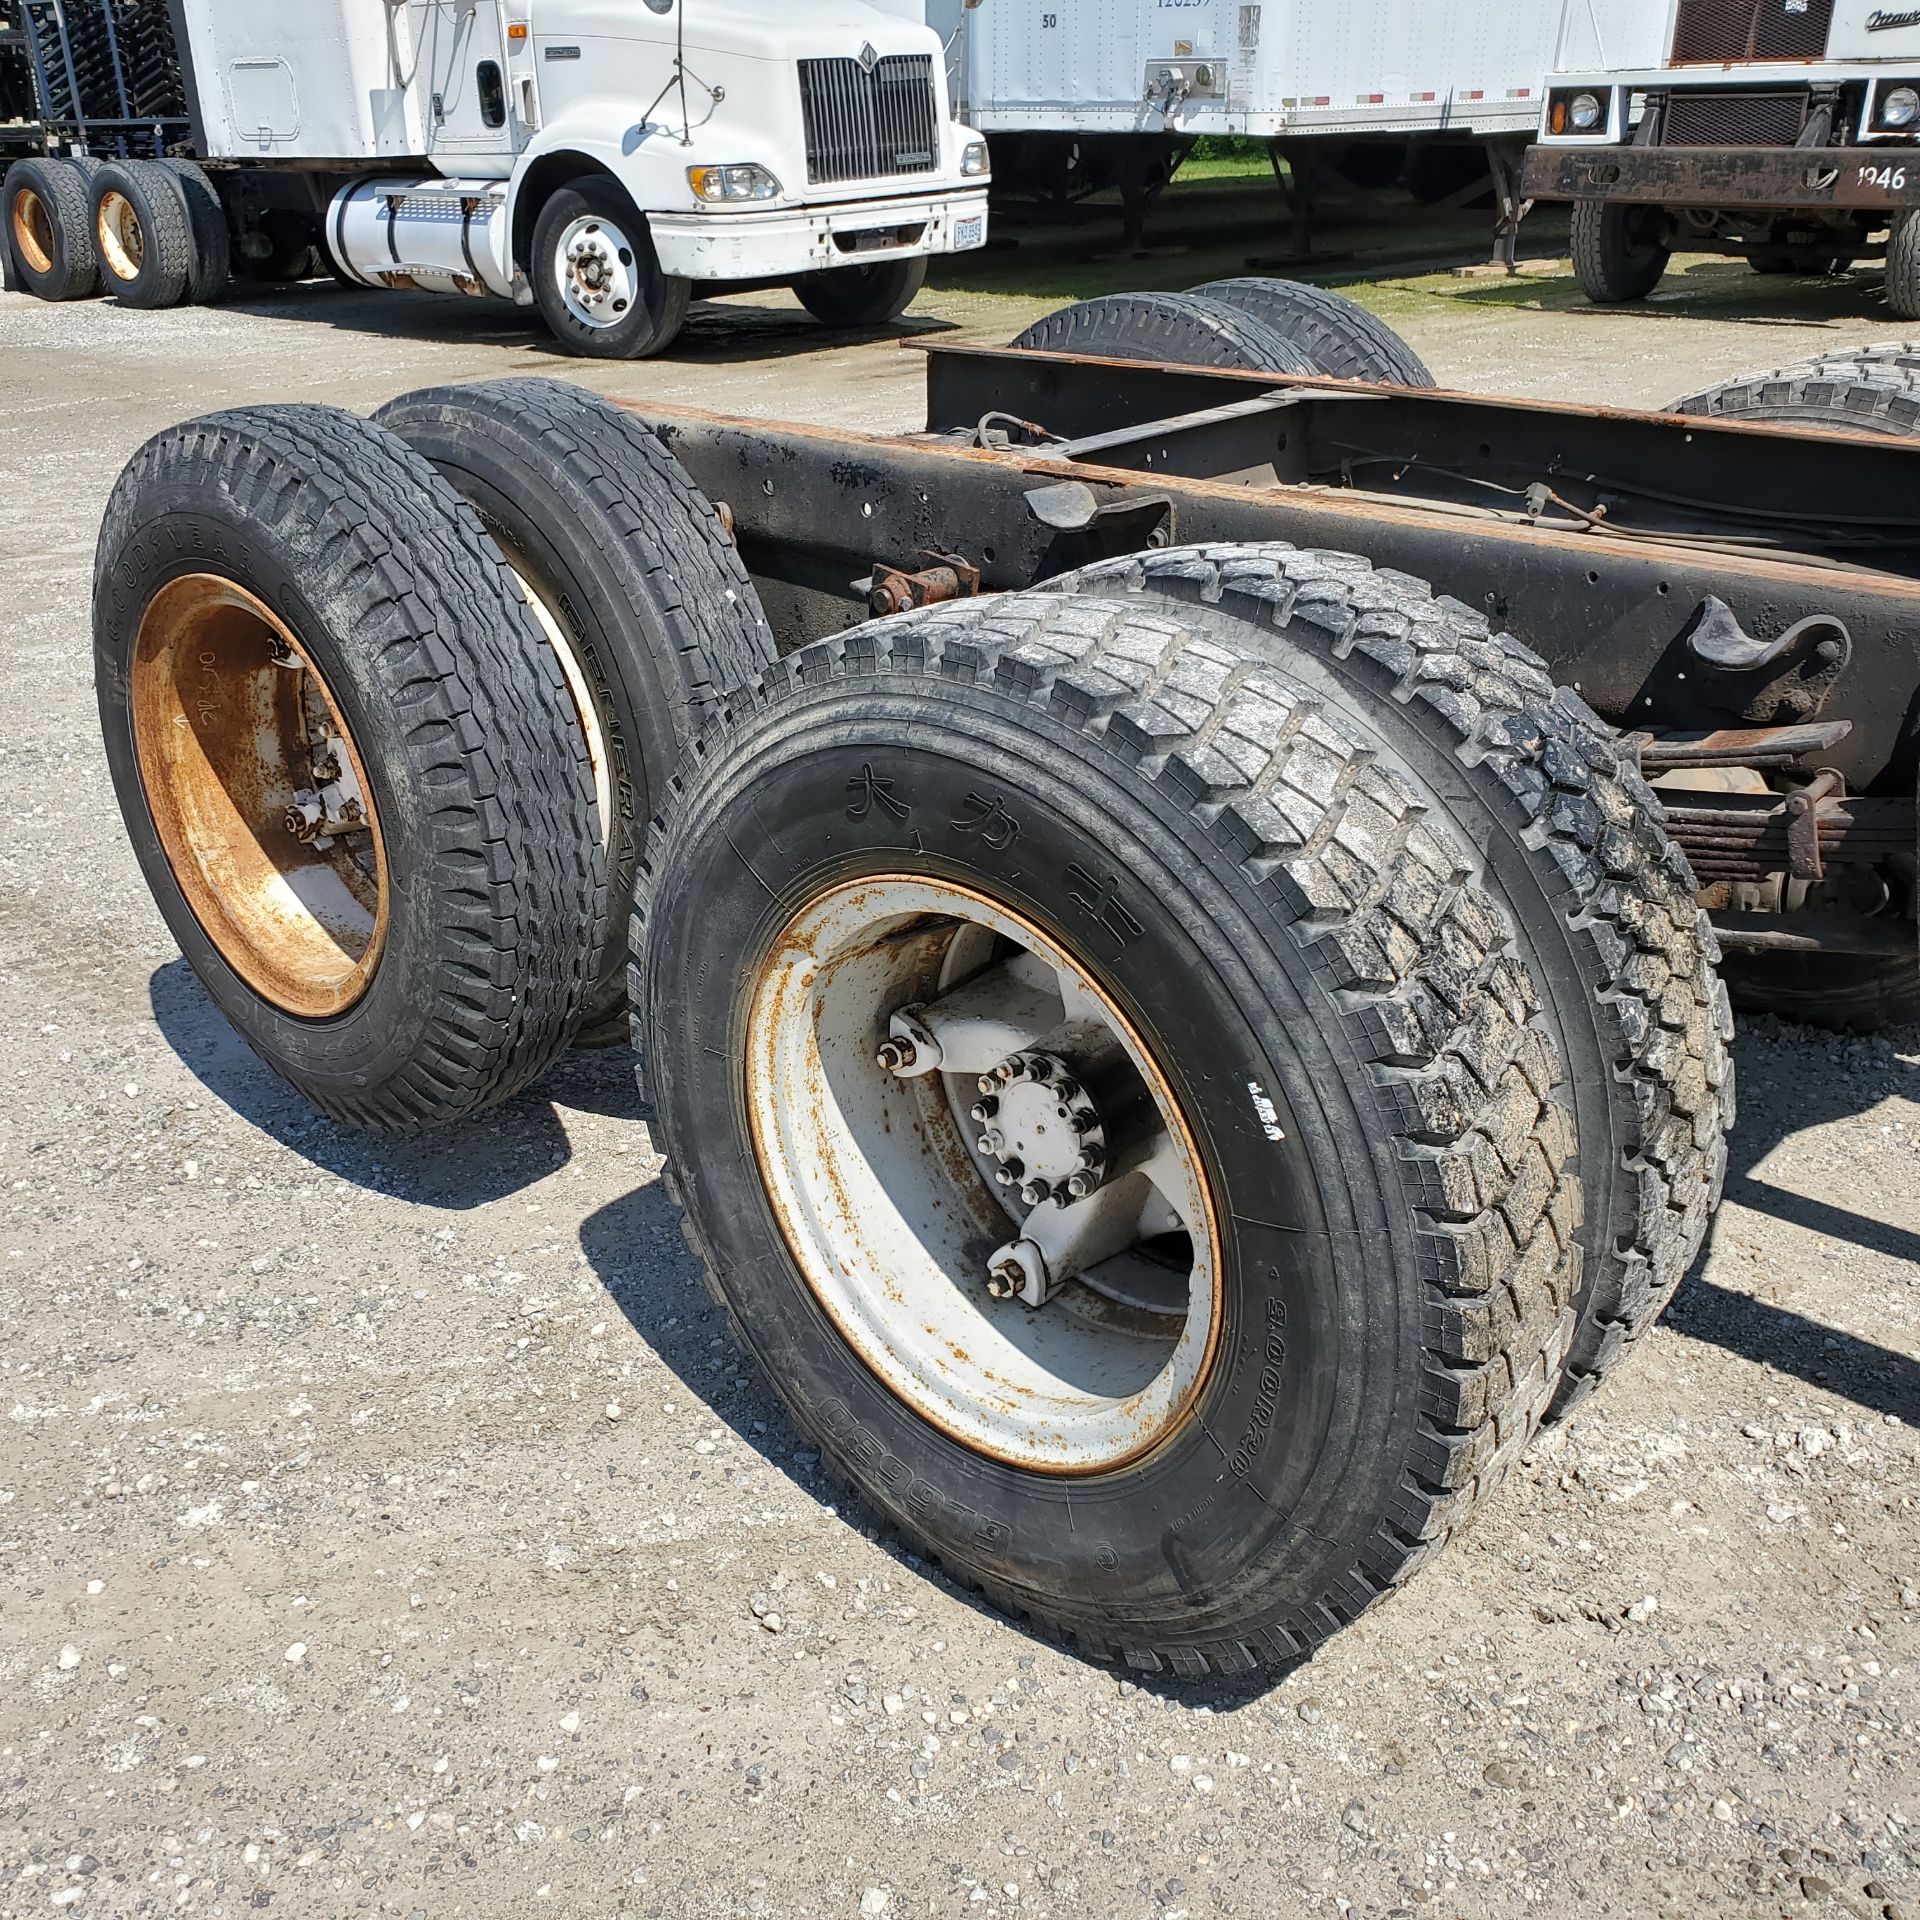 1977 Chevrolet C60 Cab and Chassis, Single Axle w/ Dual Tires and Tag Axle, 5 Speed Transmission - Image 14 of 19